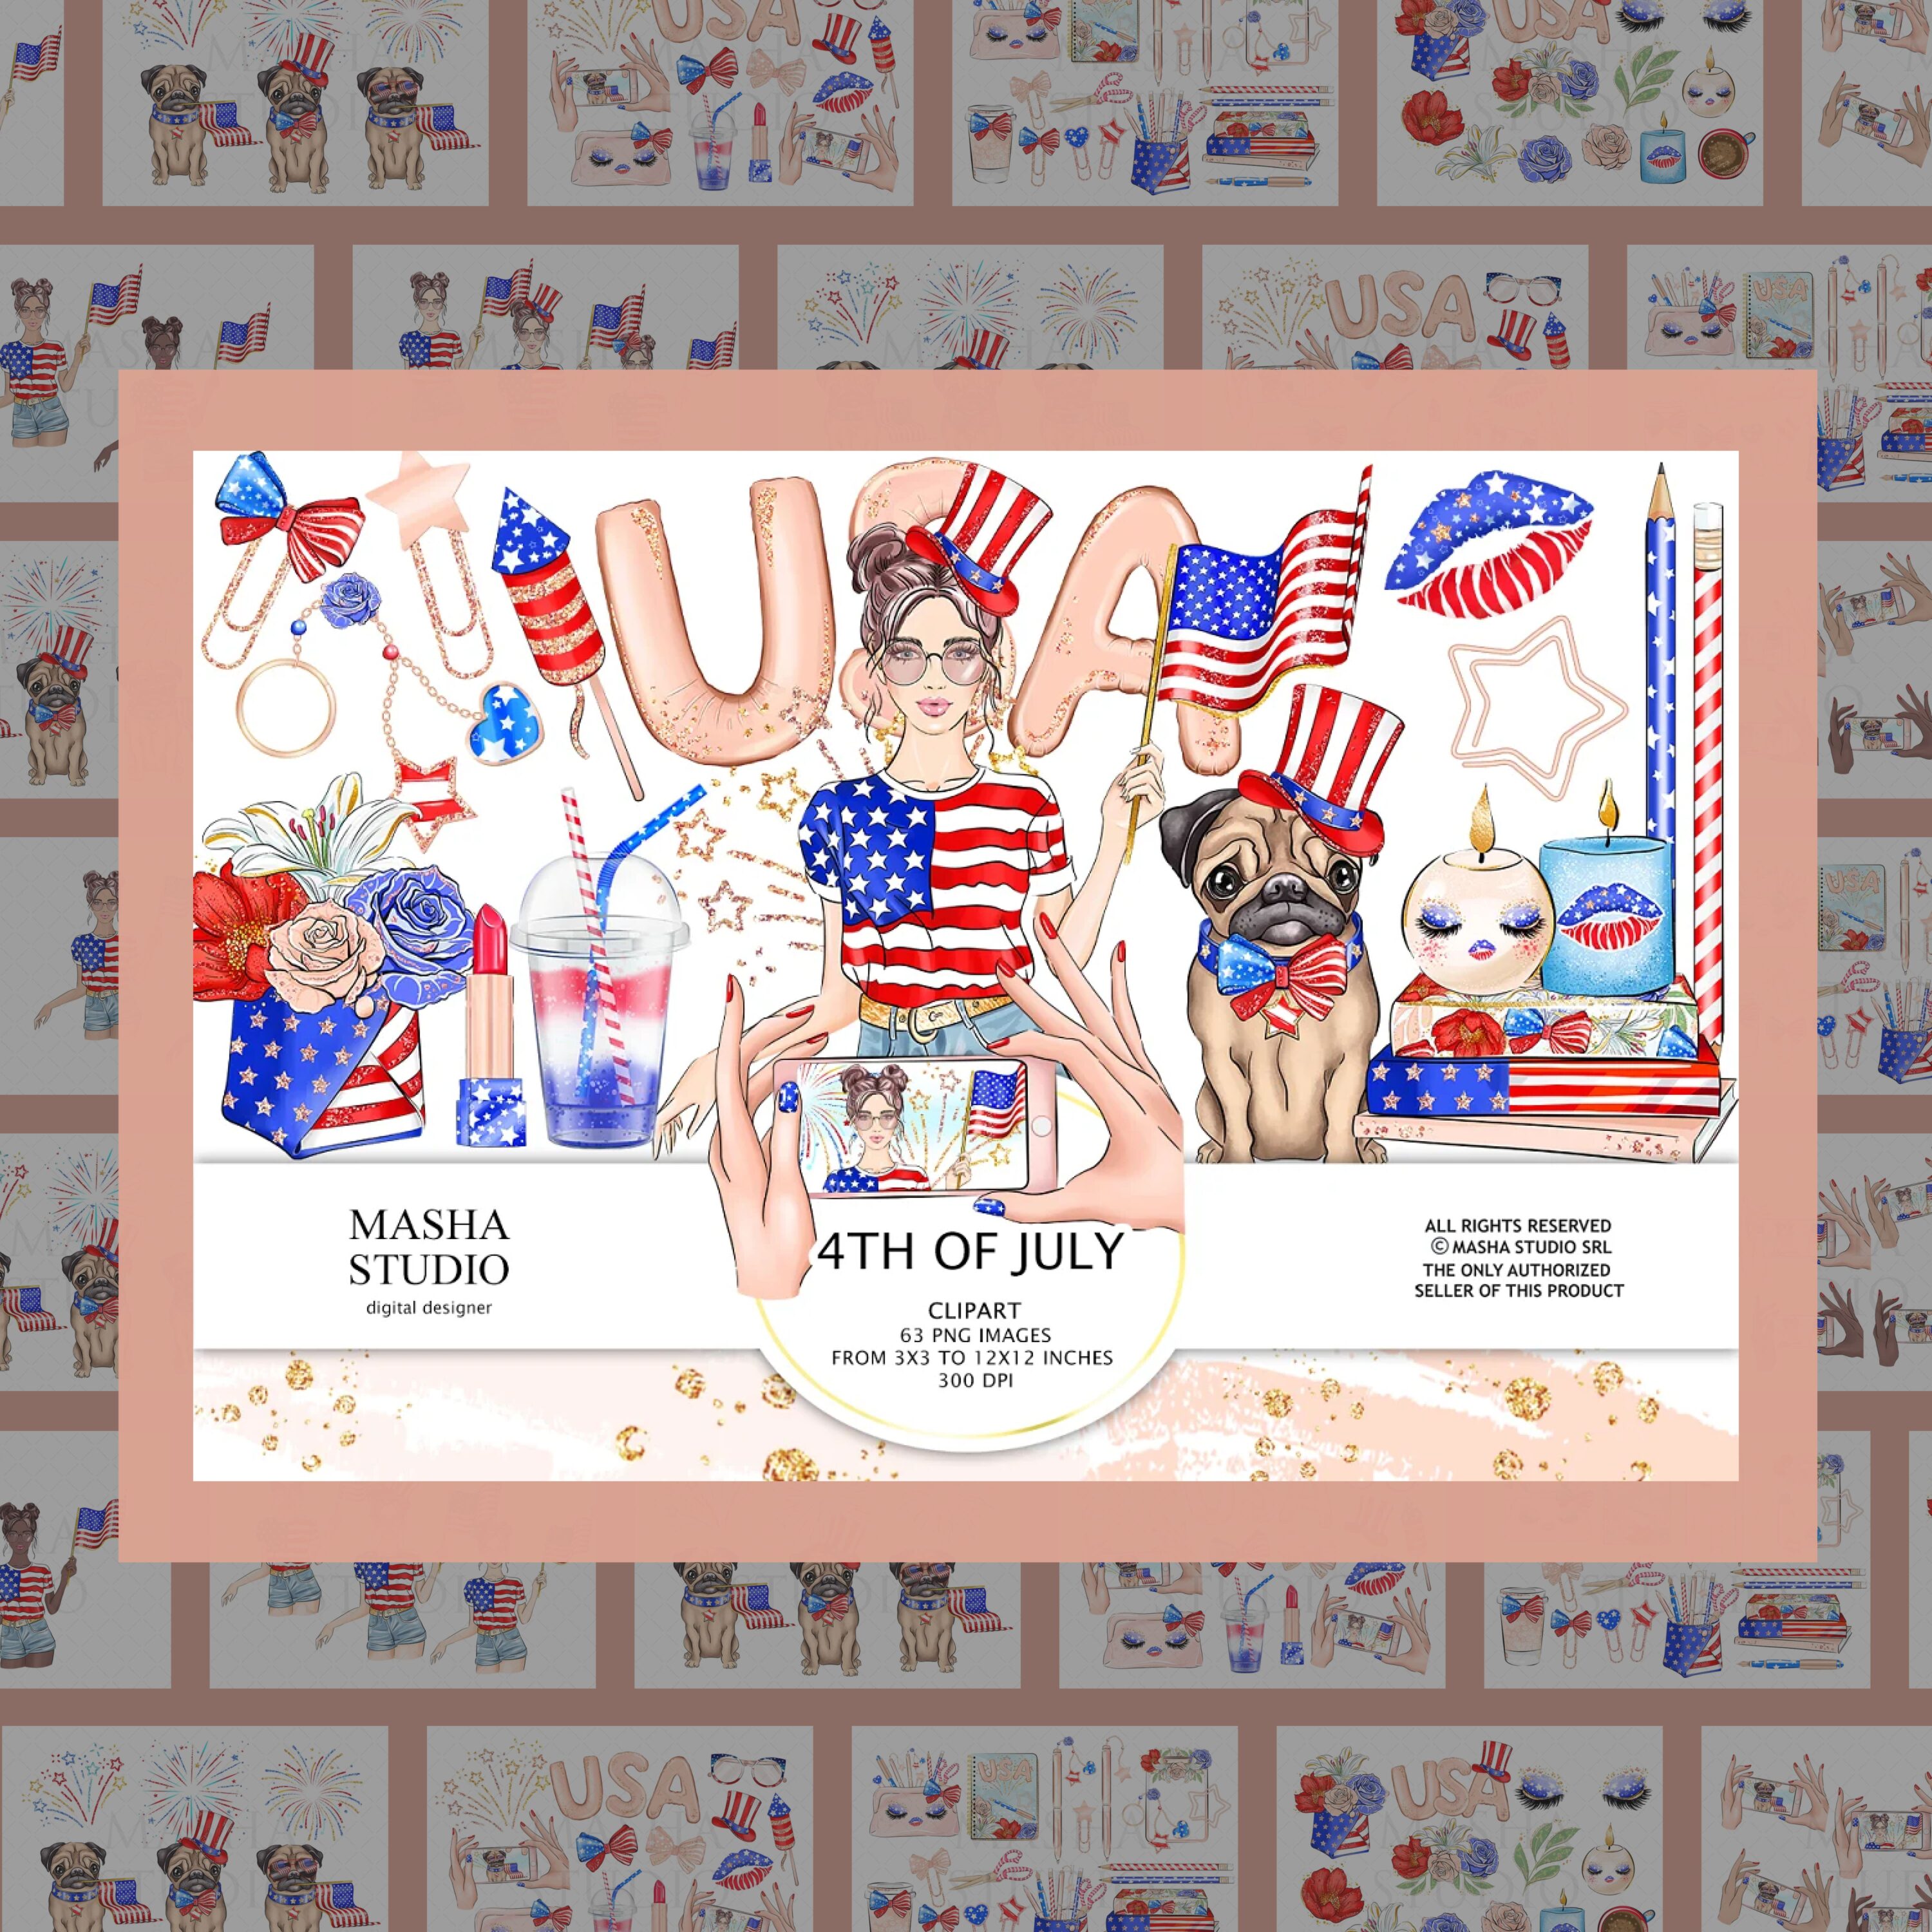 4th of July Clipart cover image.